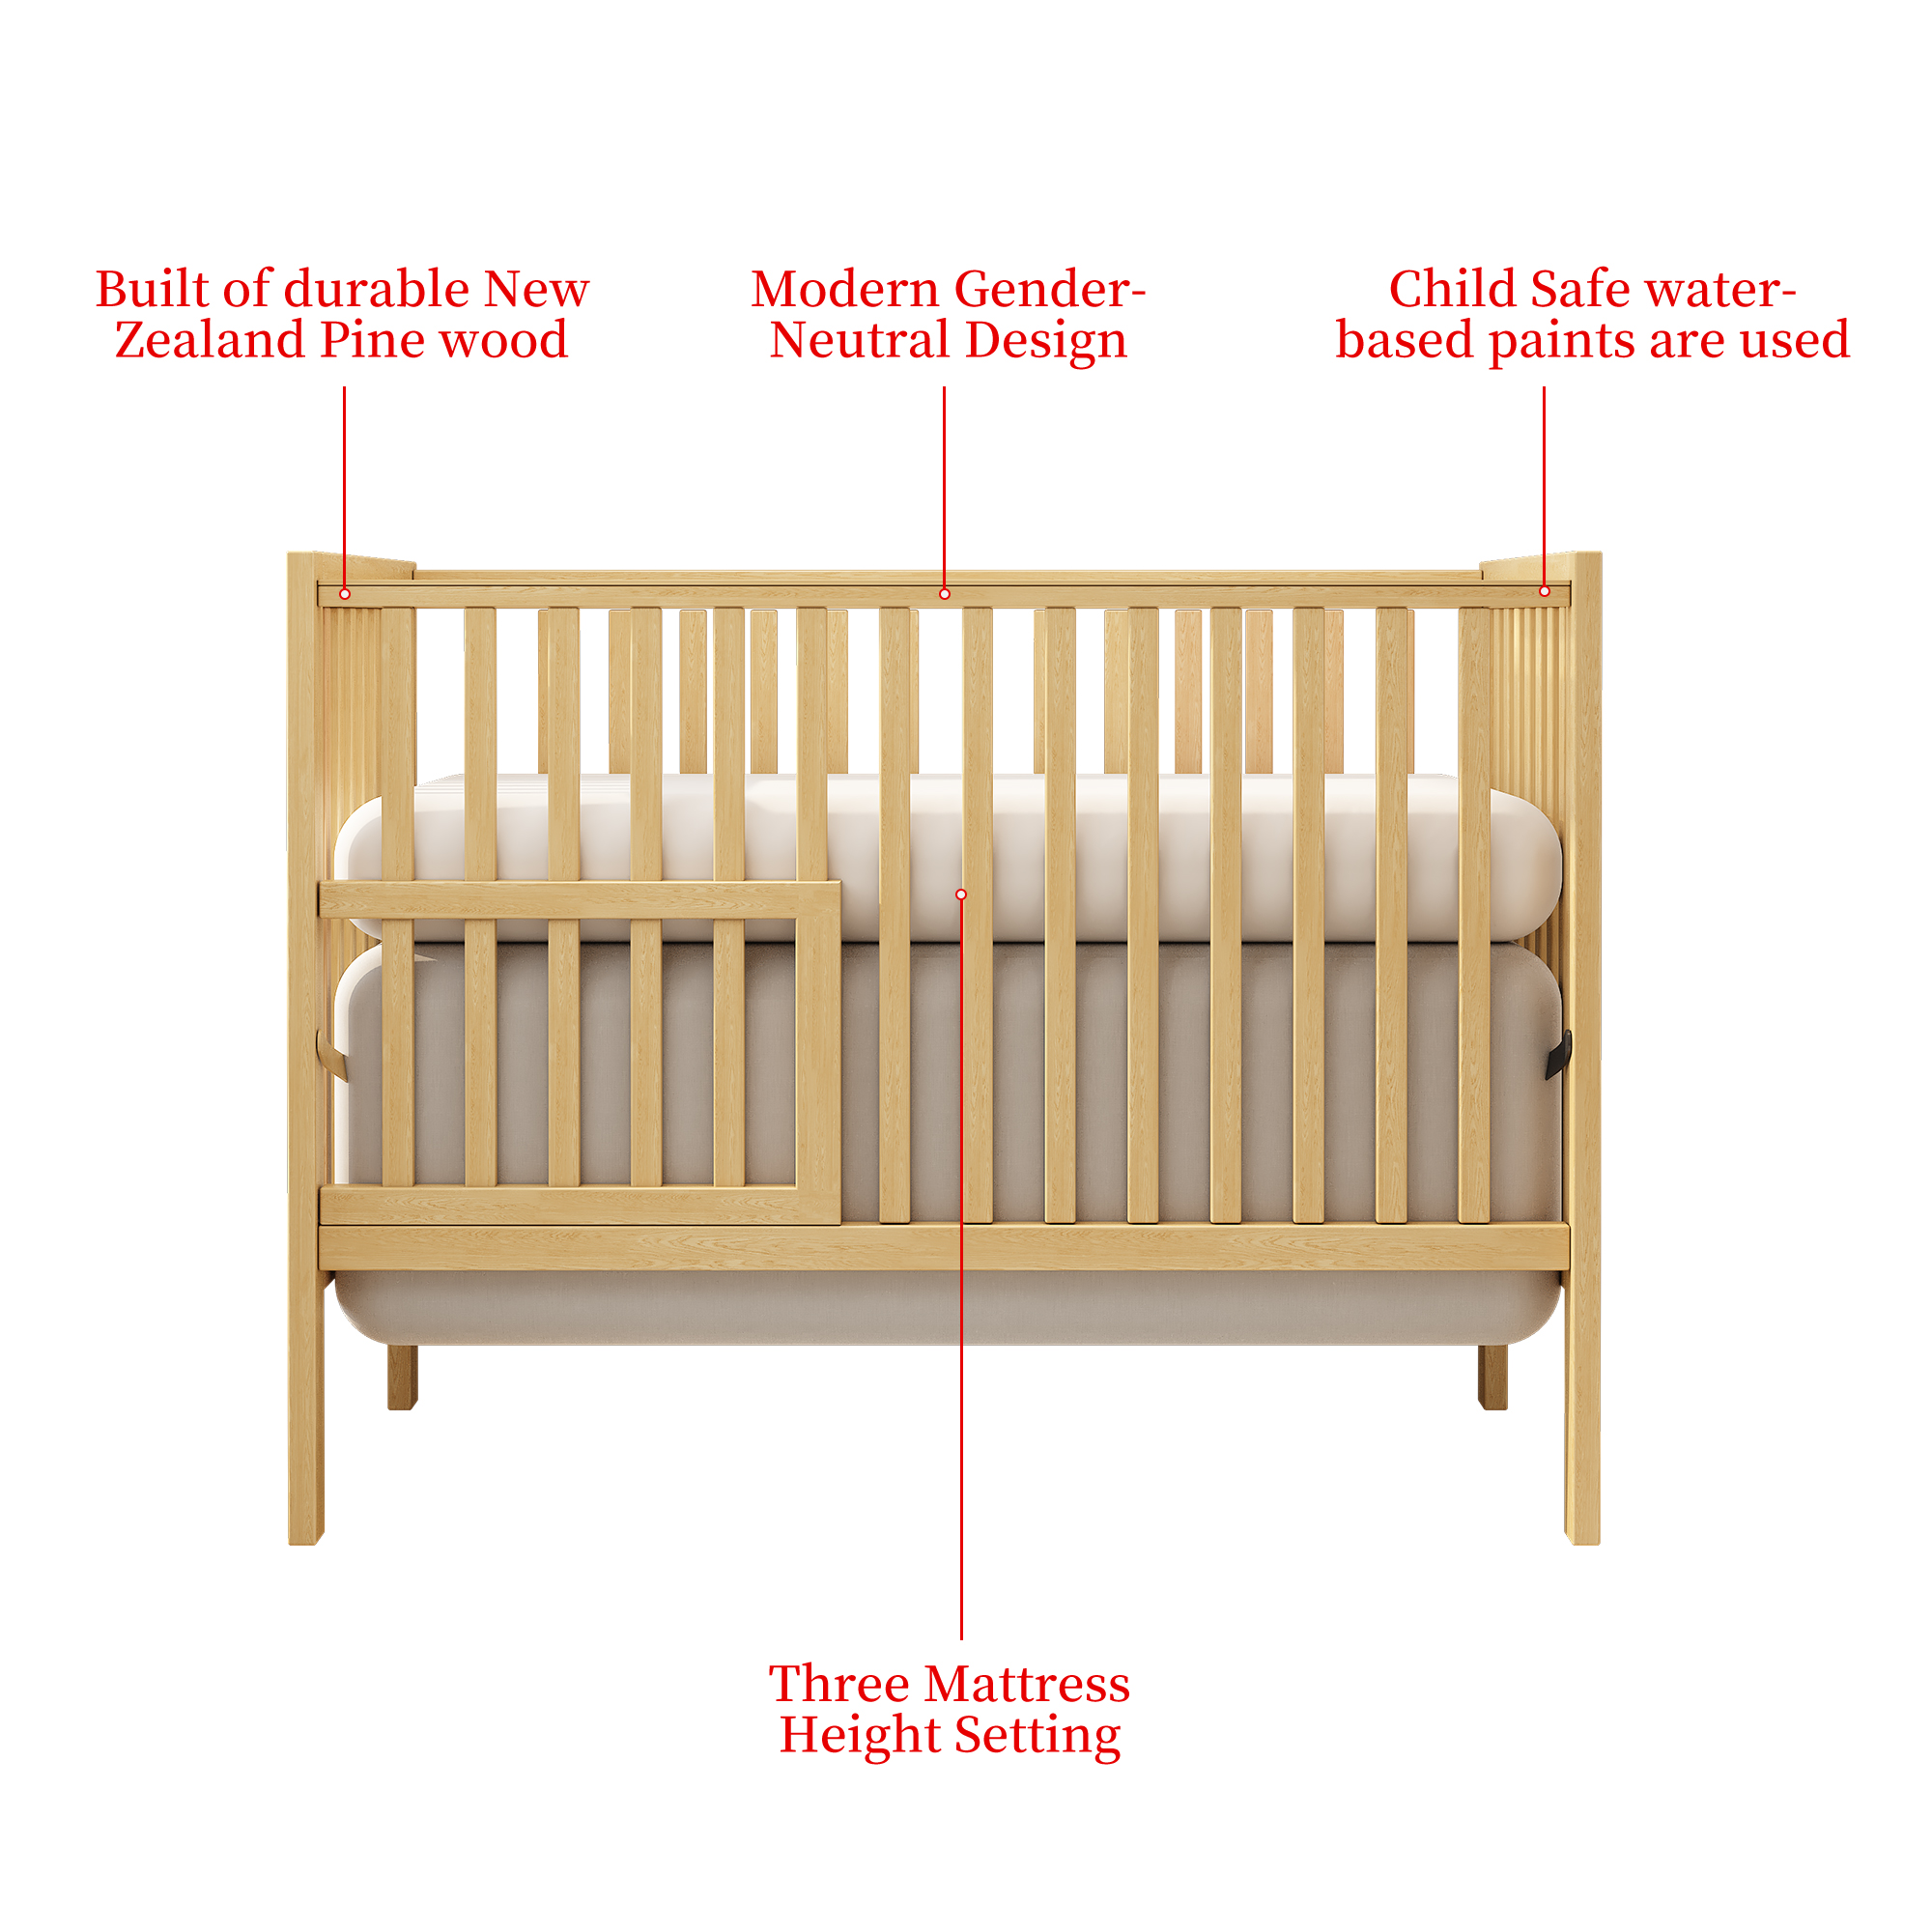 Sesslife 5-In-1 Convertible Crib, Baby Bed, Converts from Baby Crib to Toddler Bed, Fits Standard Full-Size Crib Mattress ,Easy to Assemble(Natural) - image 4 of 9